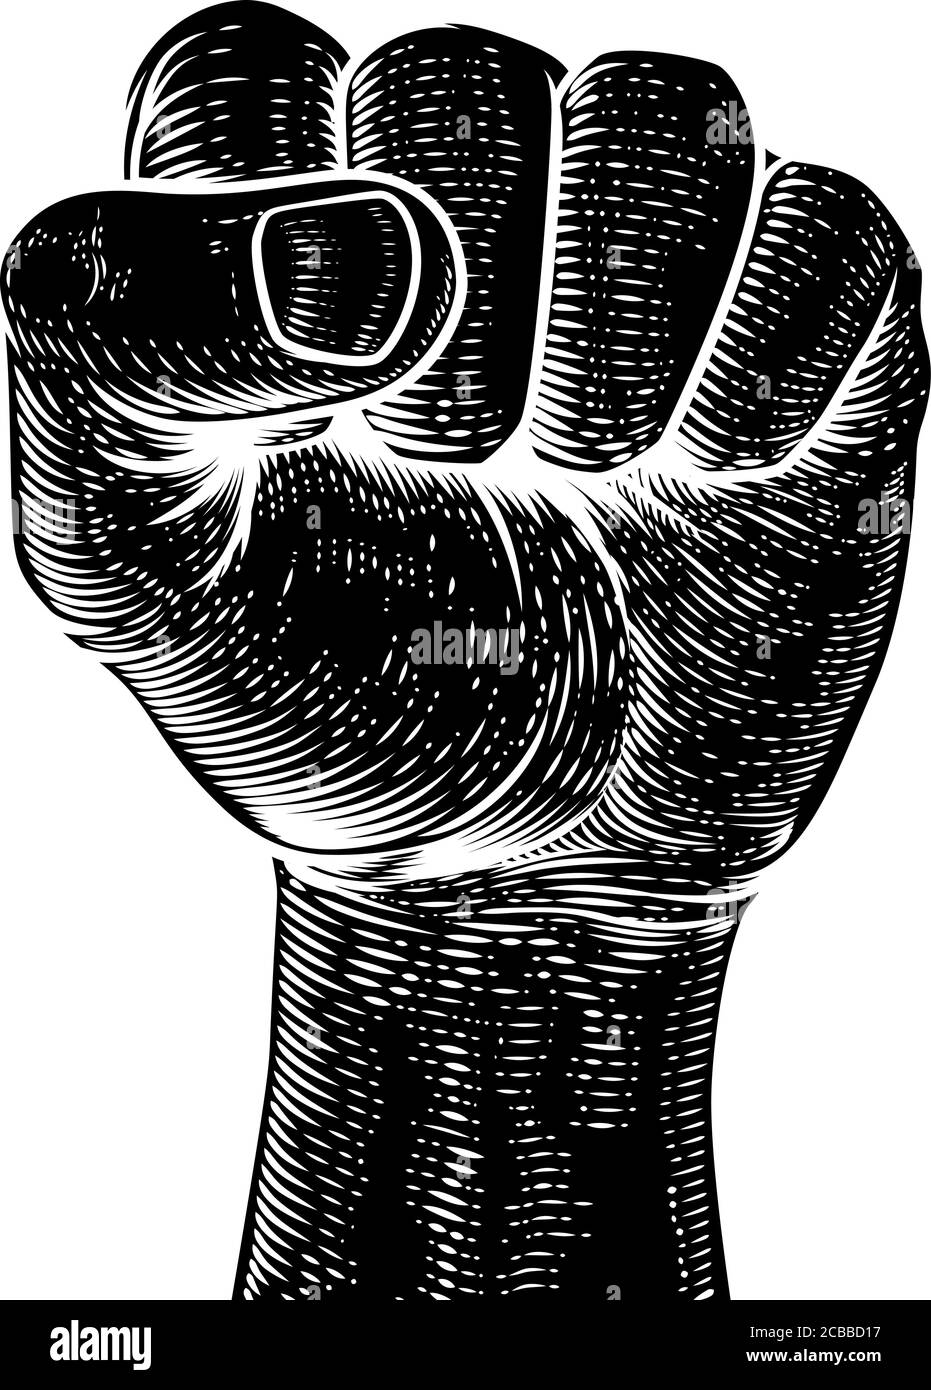 Fist in the Air Vintage Propaganda Poster Style Stock Vektor